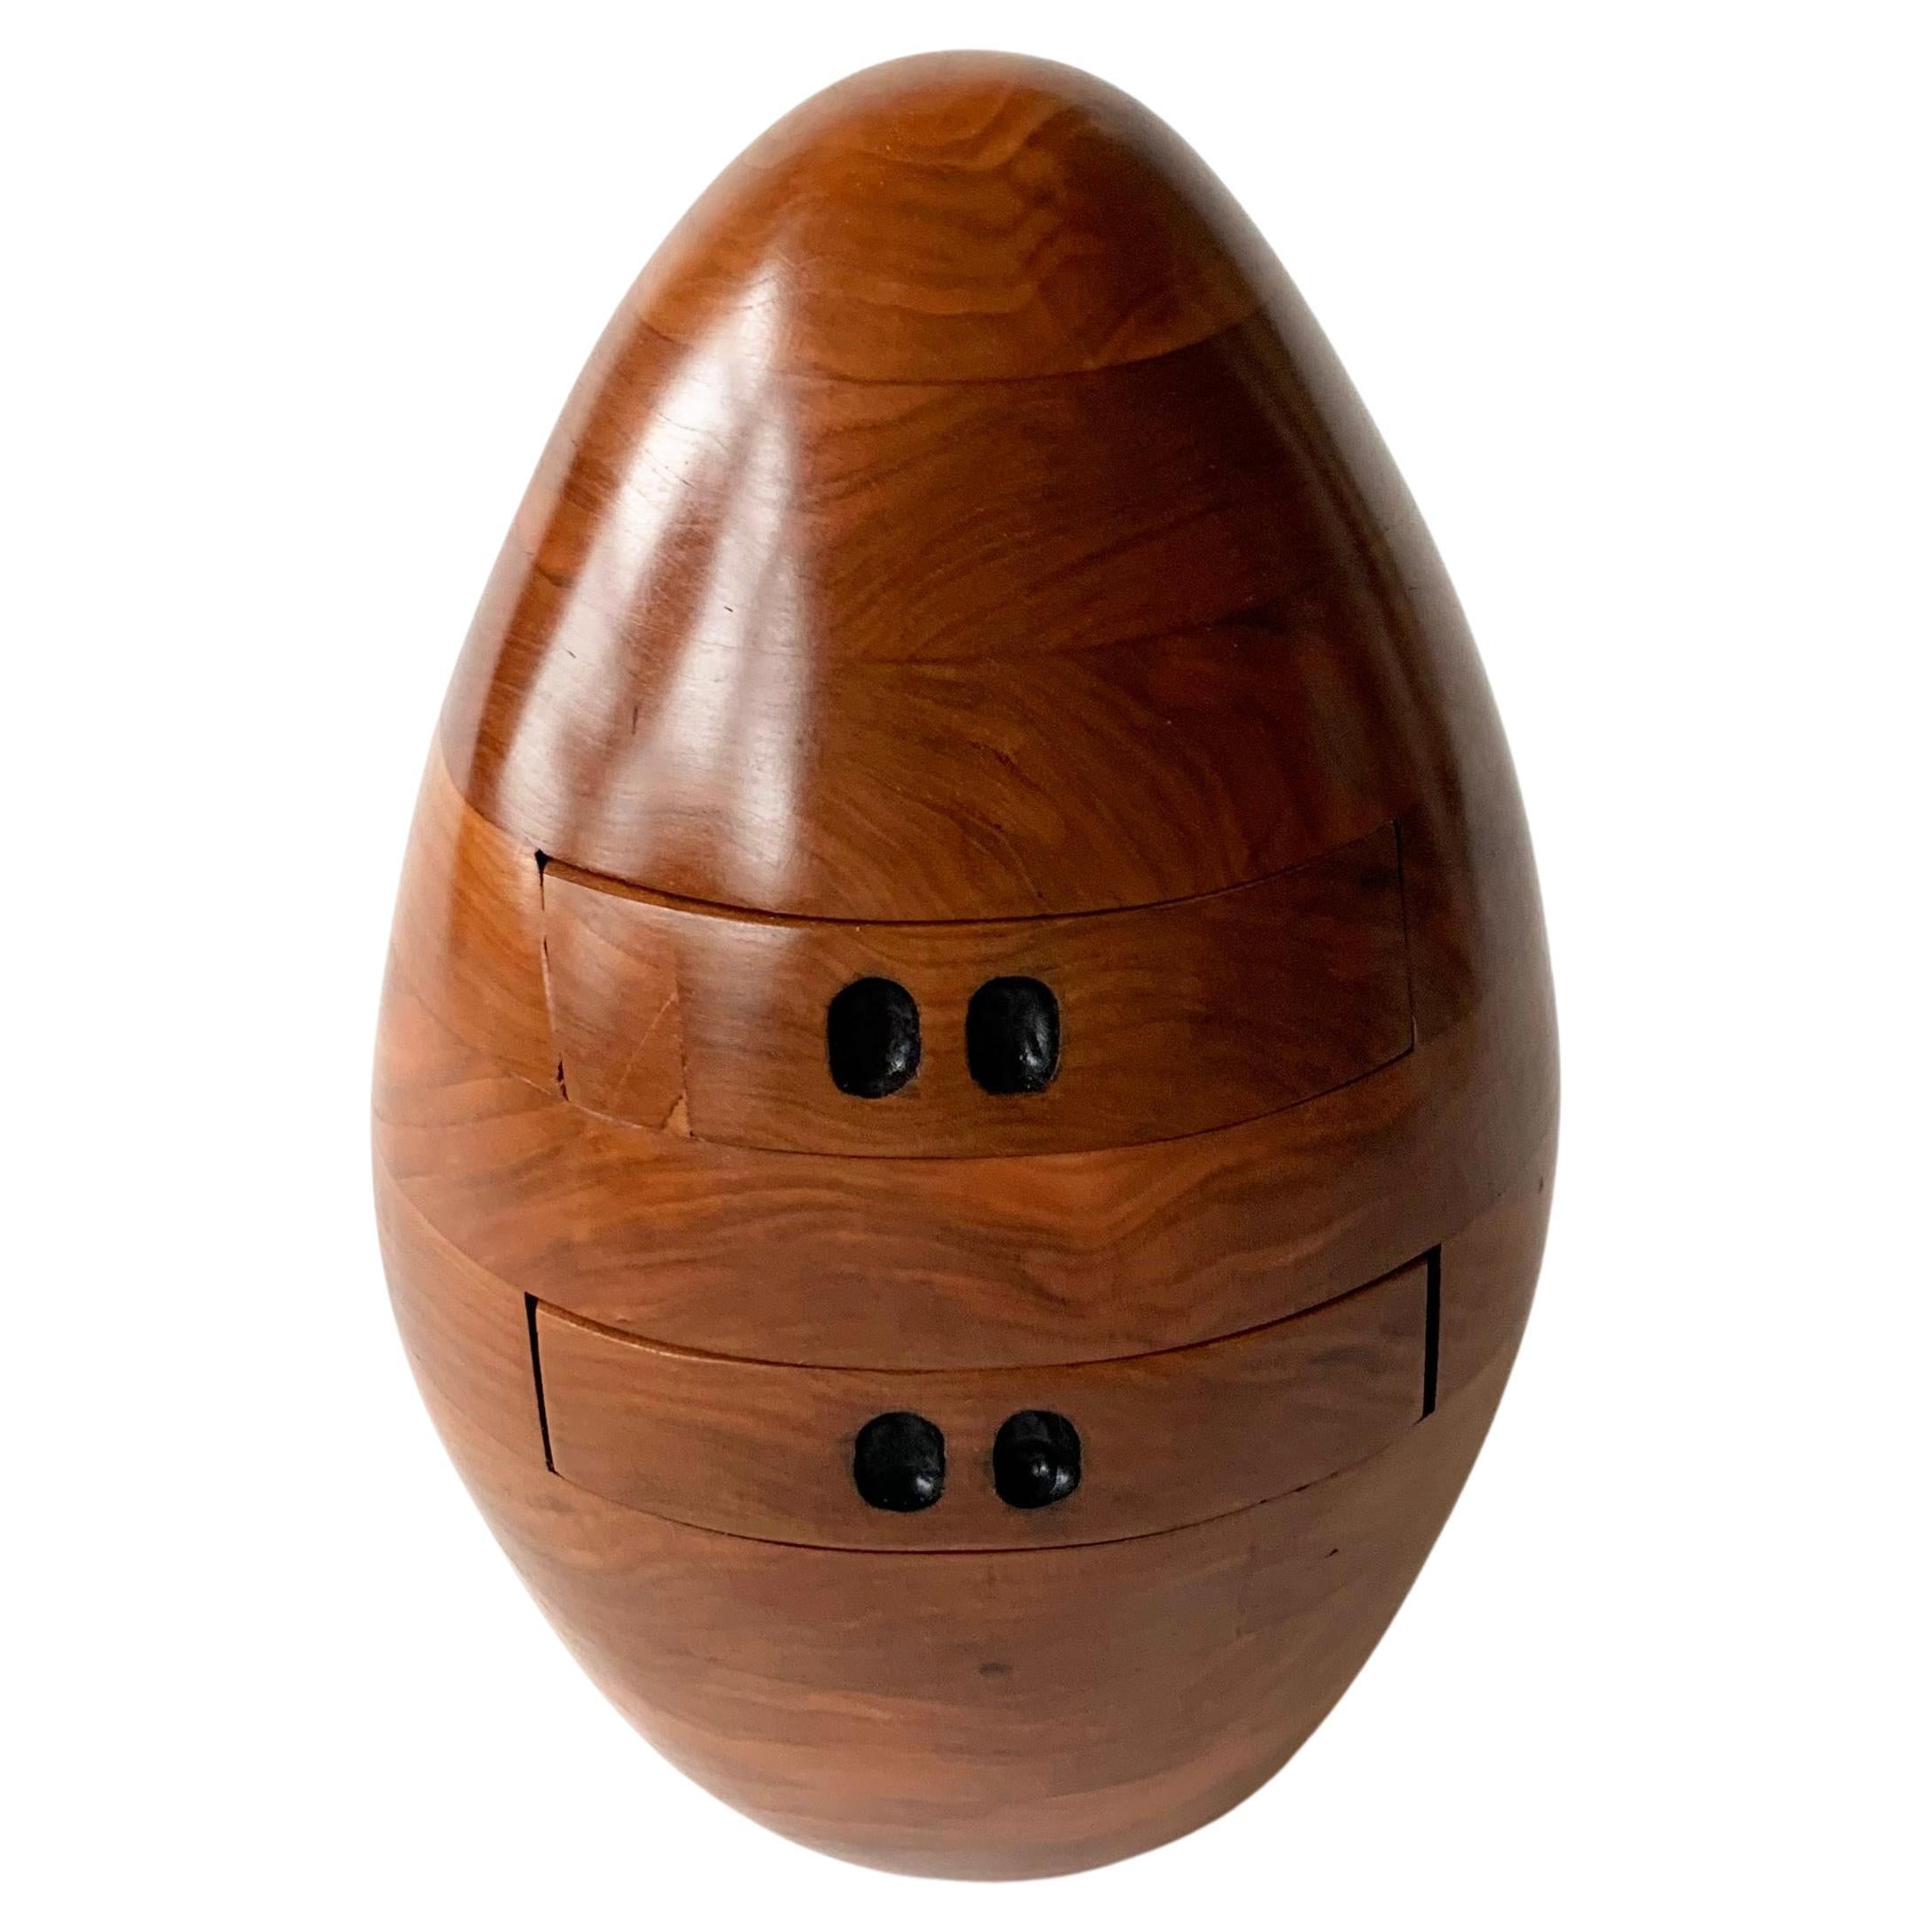 Cherry Egg, Multi-Drawer Small Decorative Chest, Hand Carved Wood Sculpture